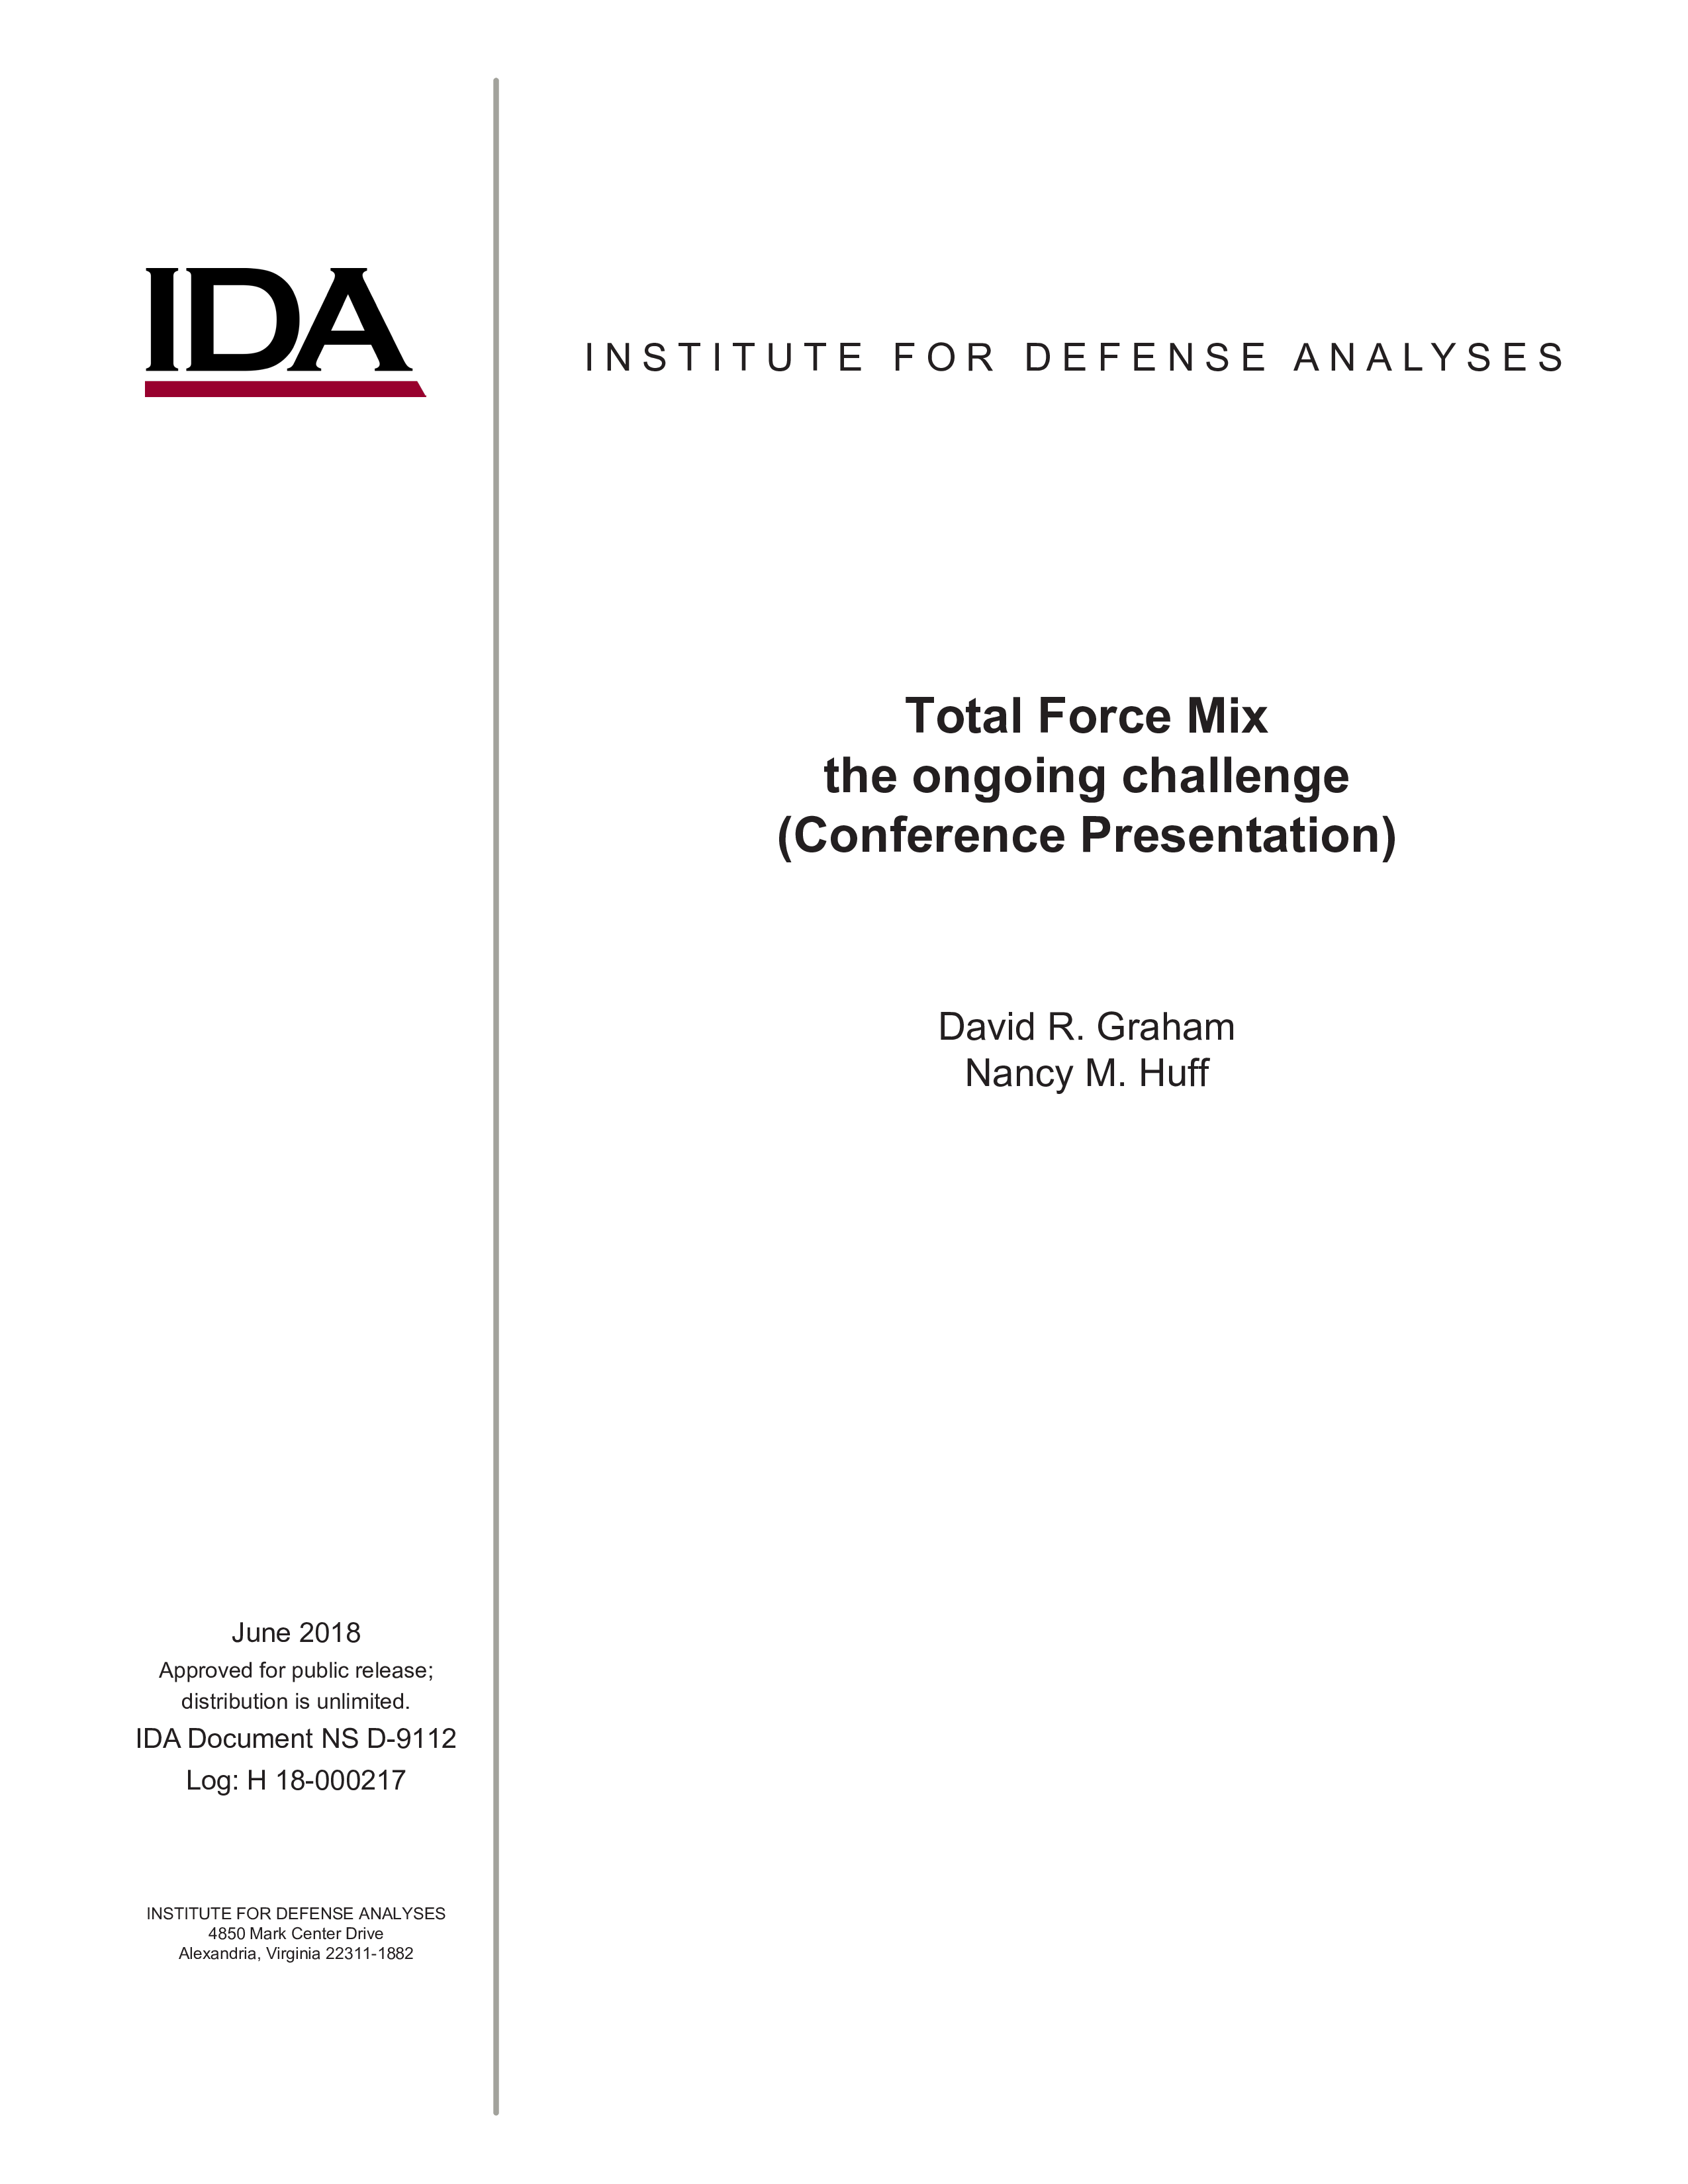 Total Force Mix – the ongoing challenge (Conference Presentation)